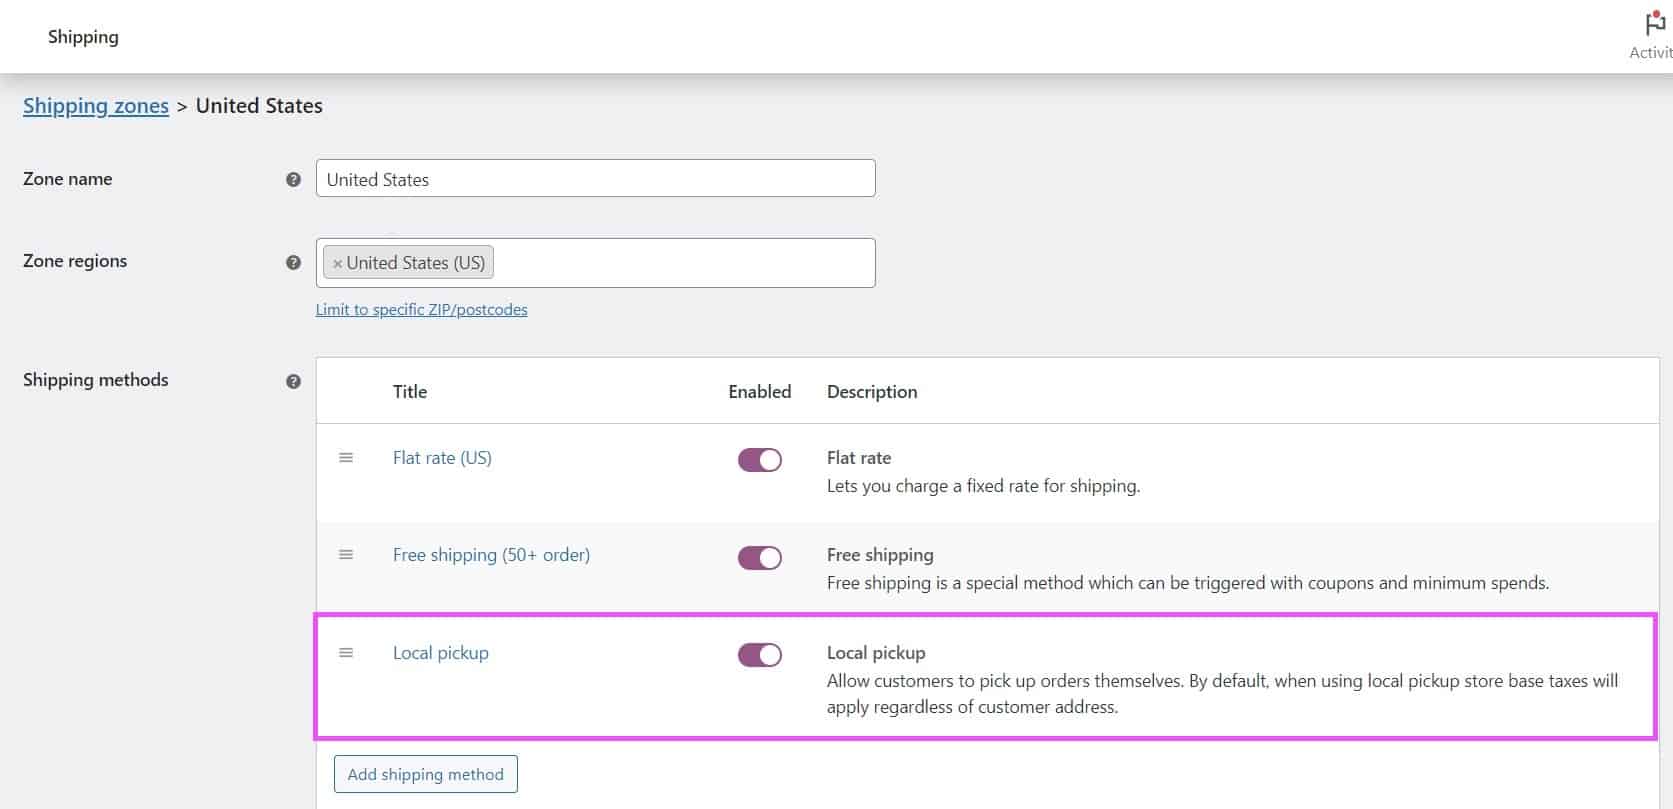 Screenshot of the shipping methods available for a shipping zone, with a "Local pickup" shipping method highlighted.